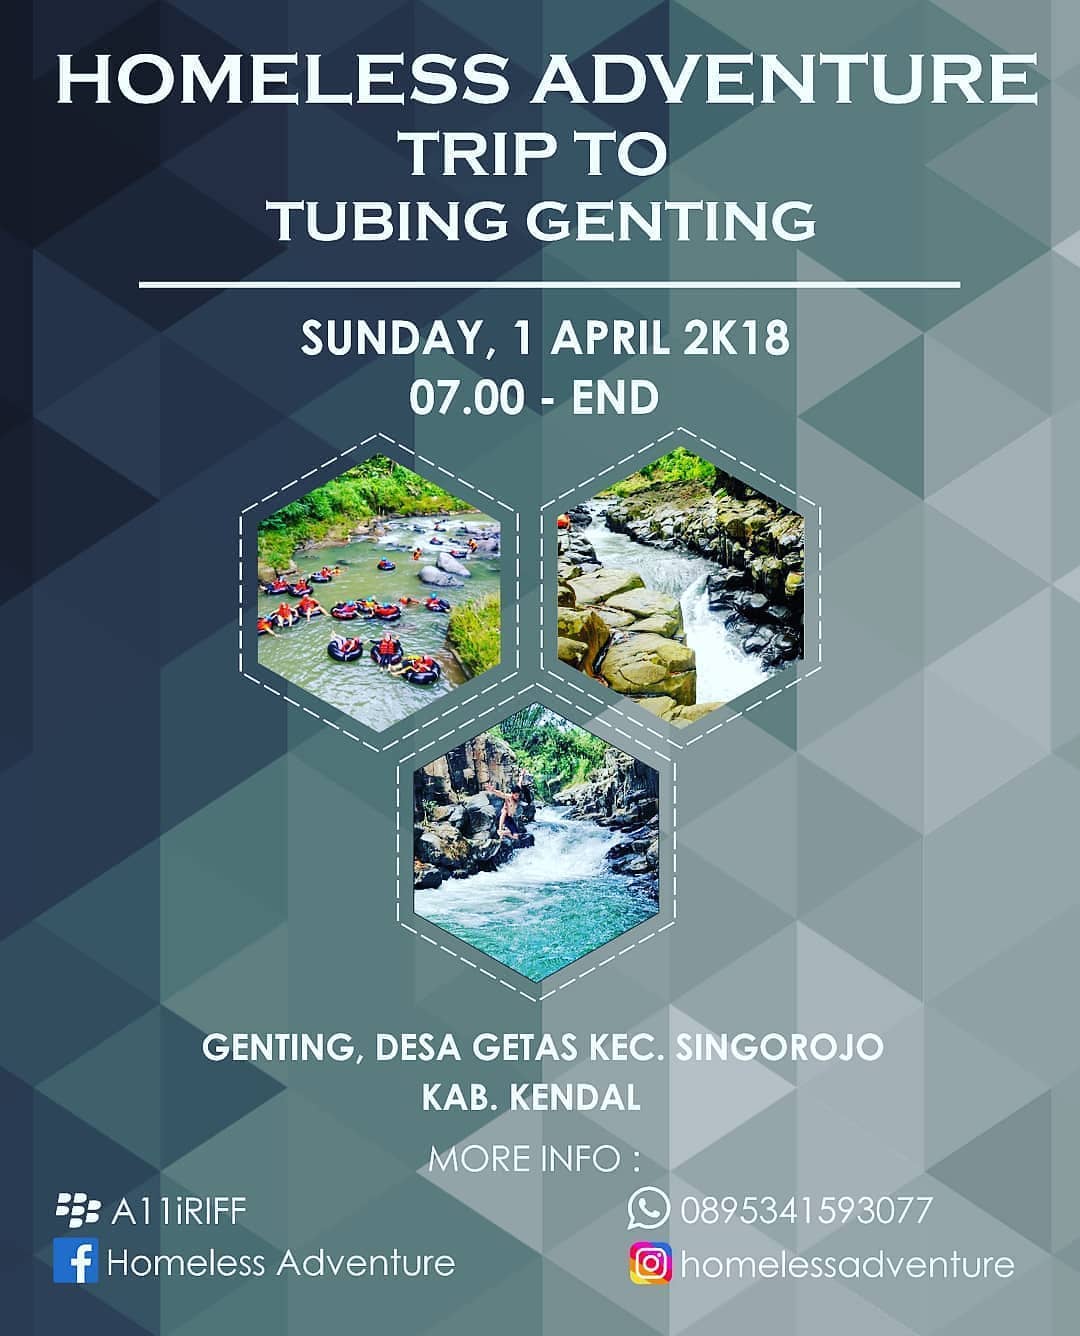 EVENT KENDAL - HOMELESS ADVENTURE TRIP TO TUBING GENTING